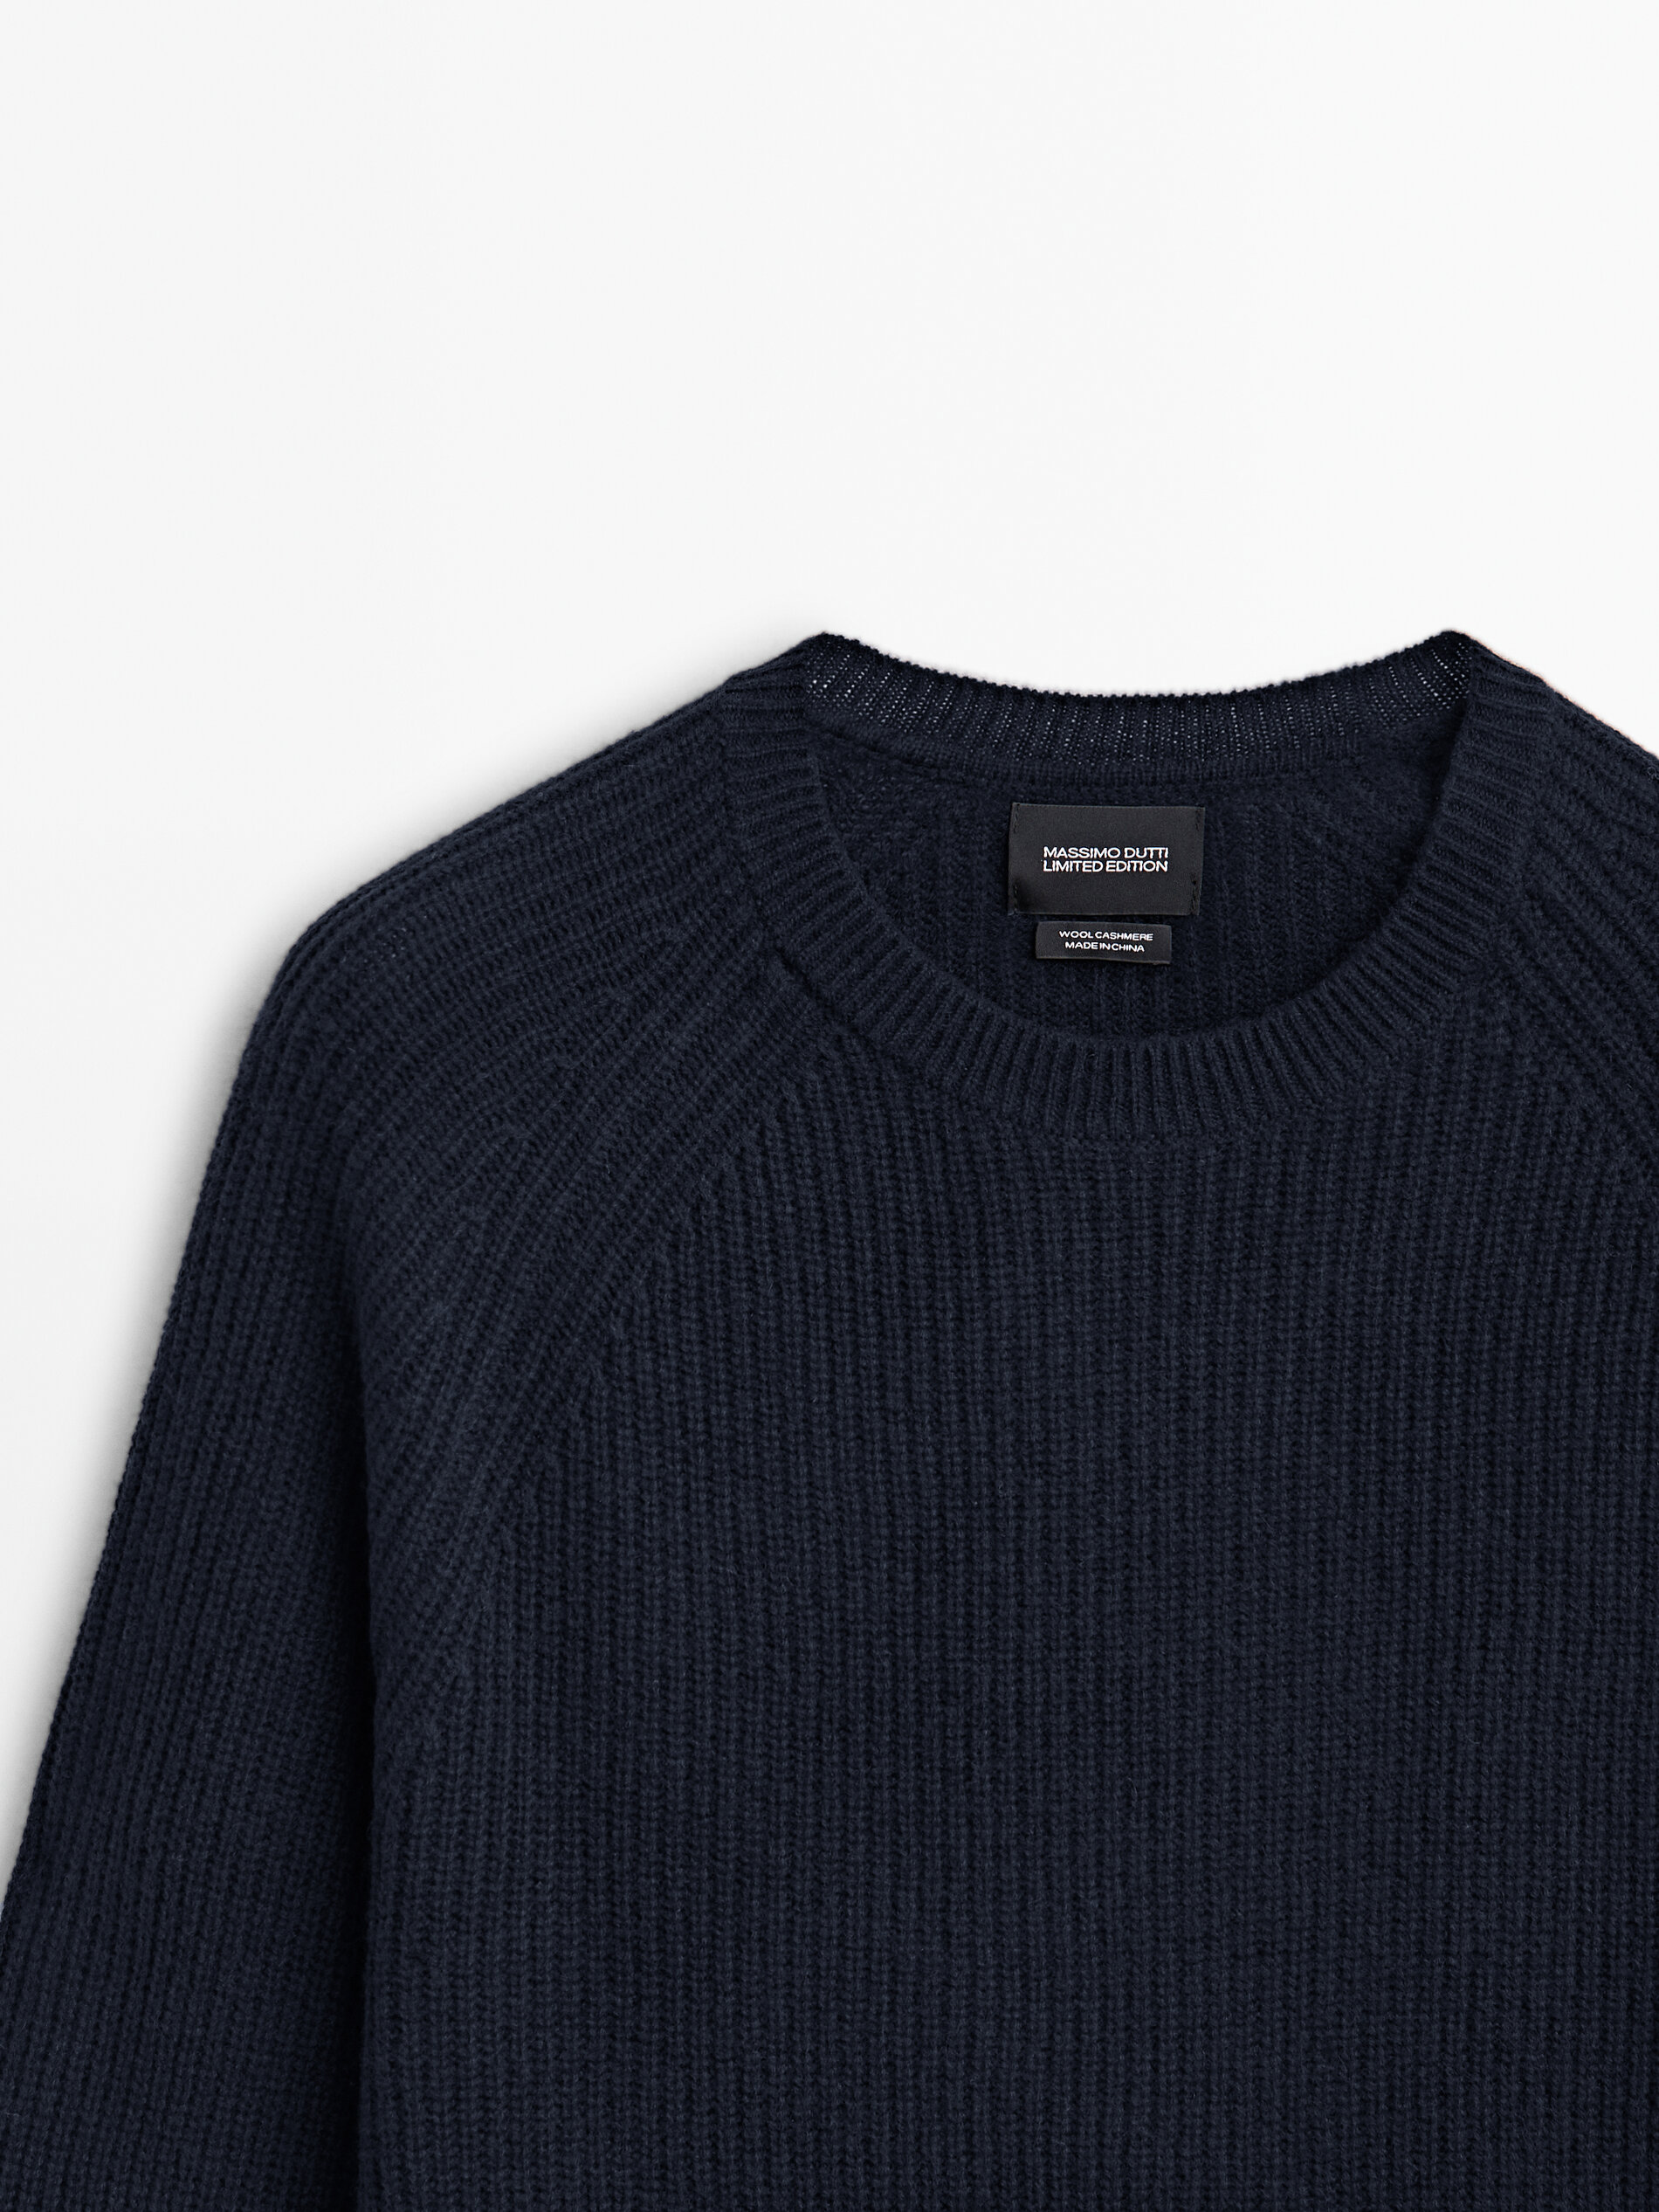 Wool blend crew neck sweater - Limited Edition